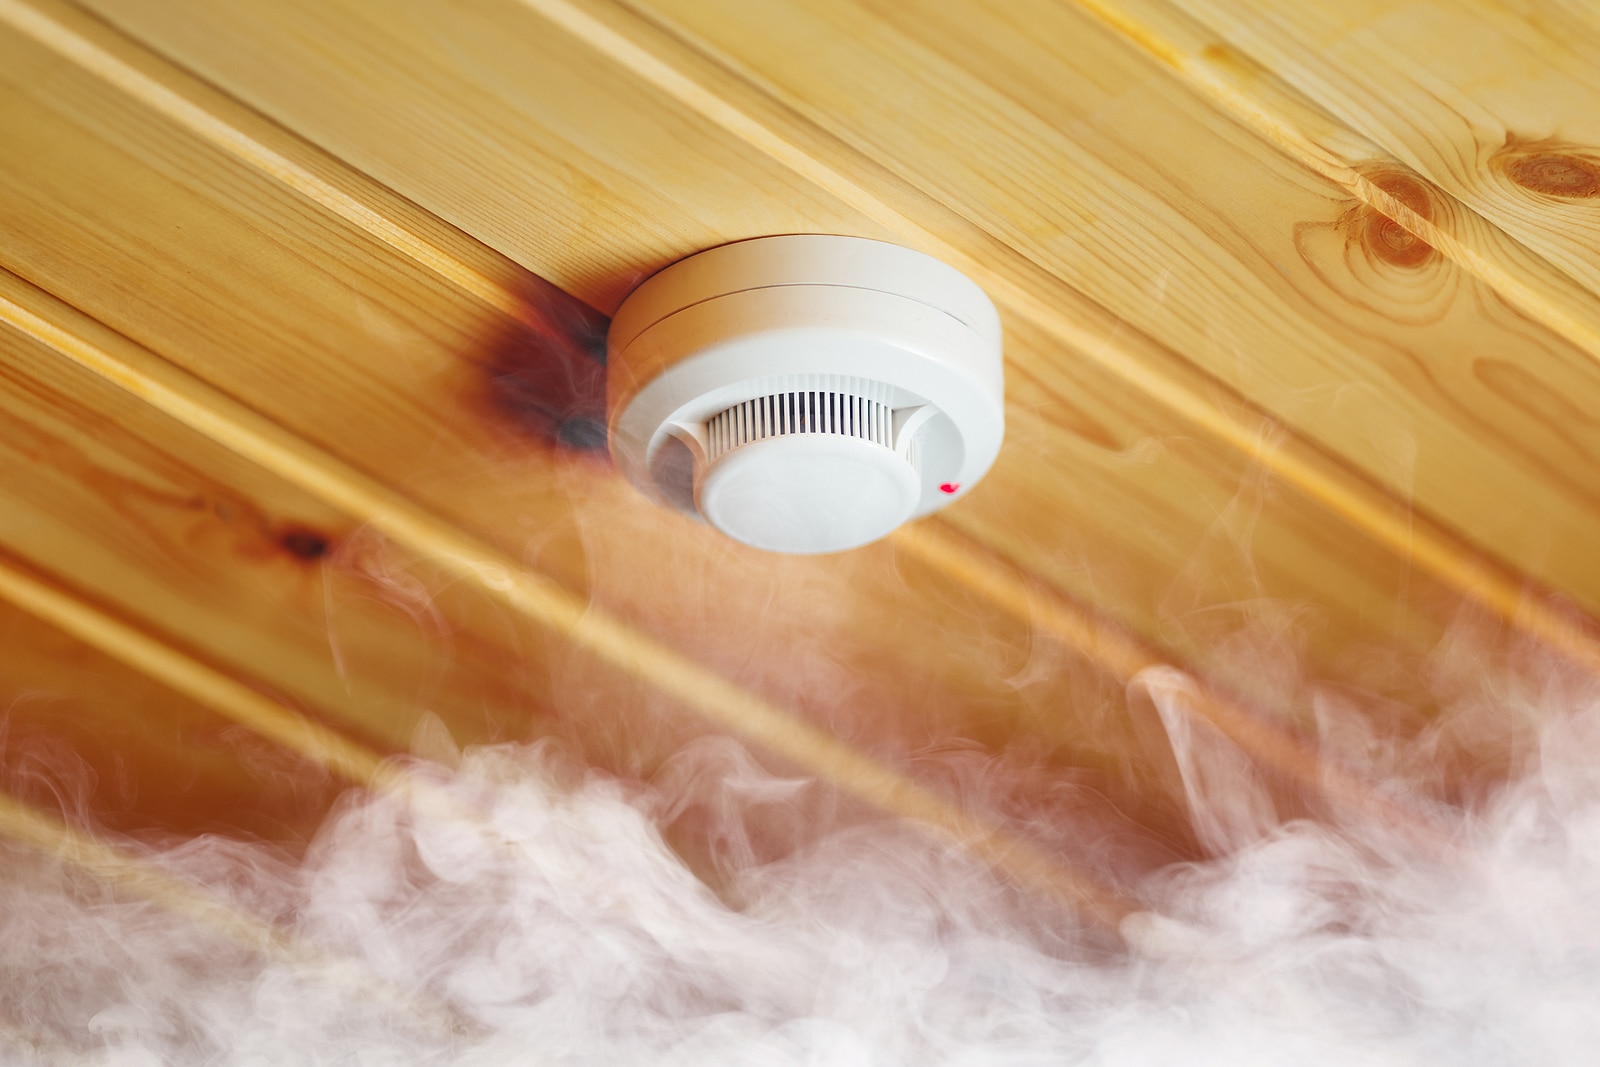 smoke detector in wooden house fire alarm in action